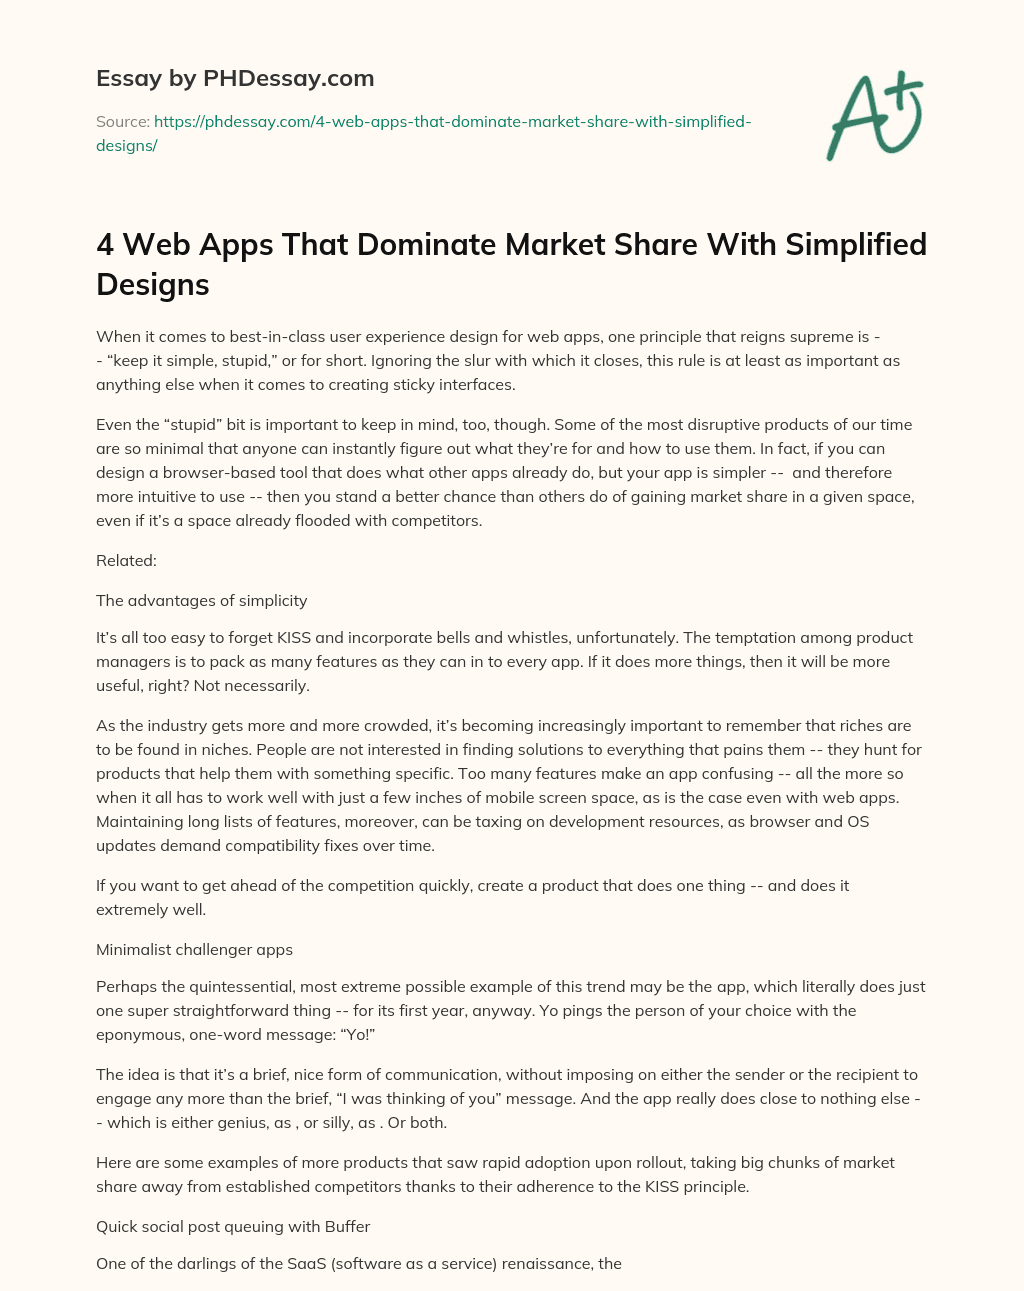 4 Web Apps That Dominate Market Share With Simplified Designs essay